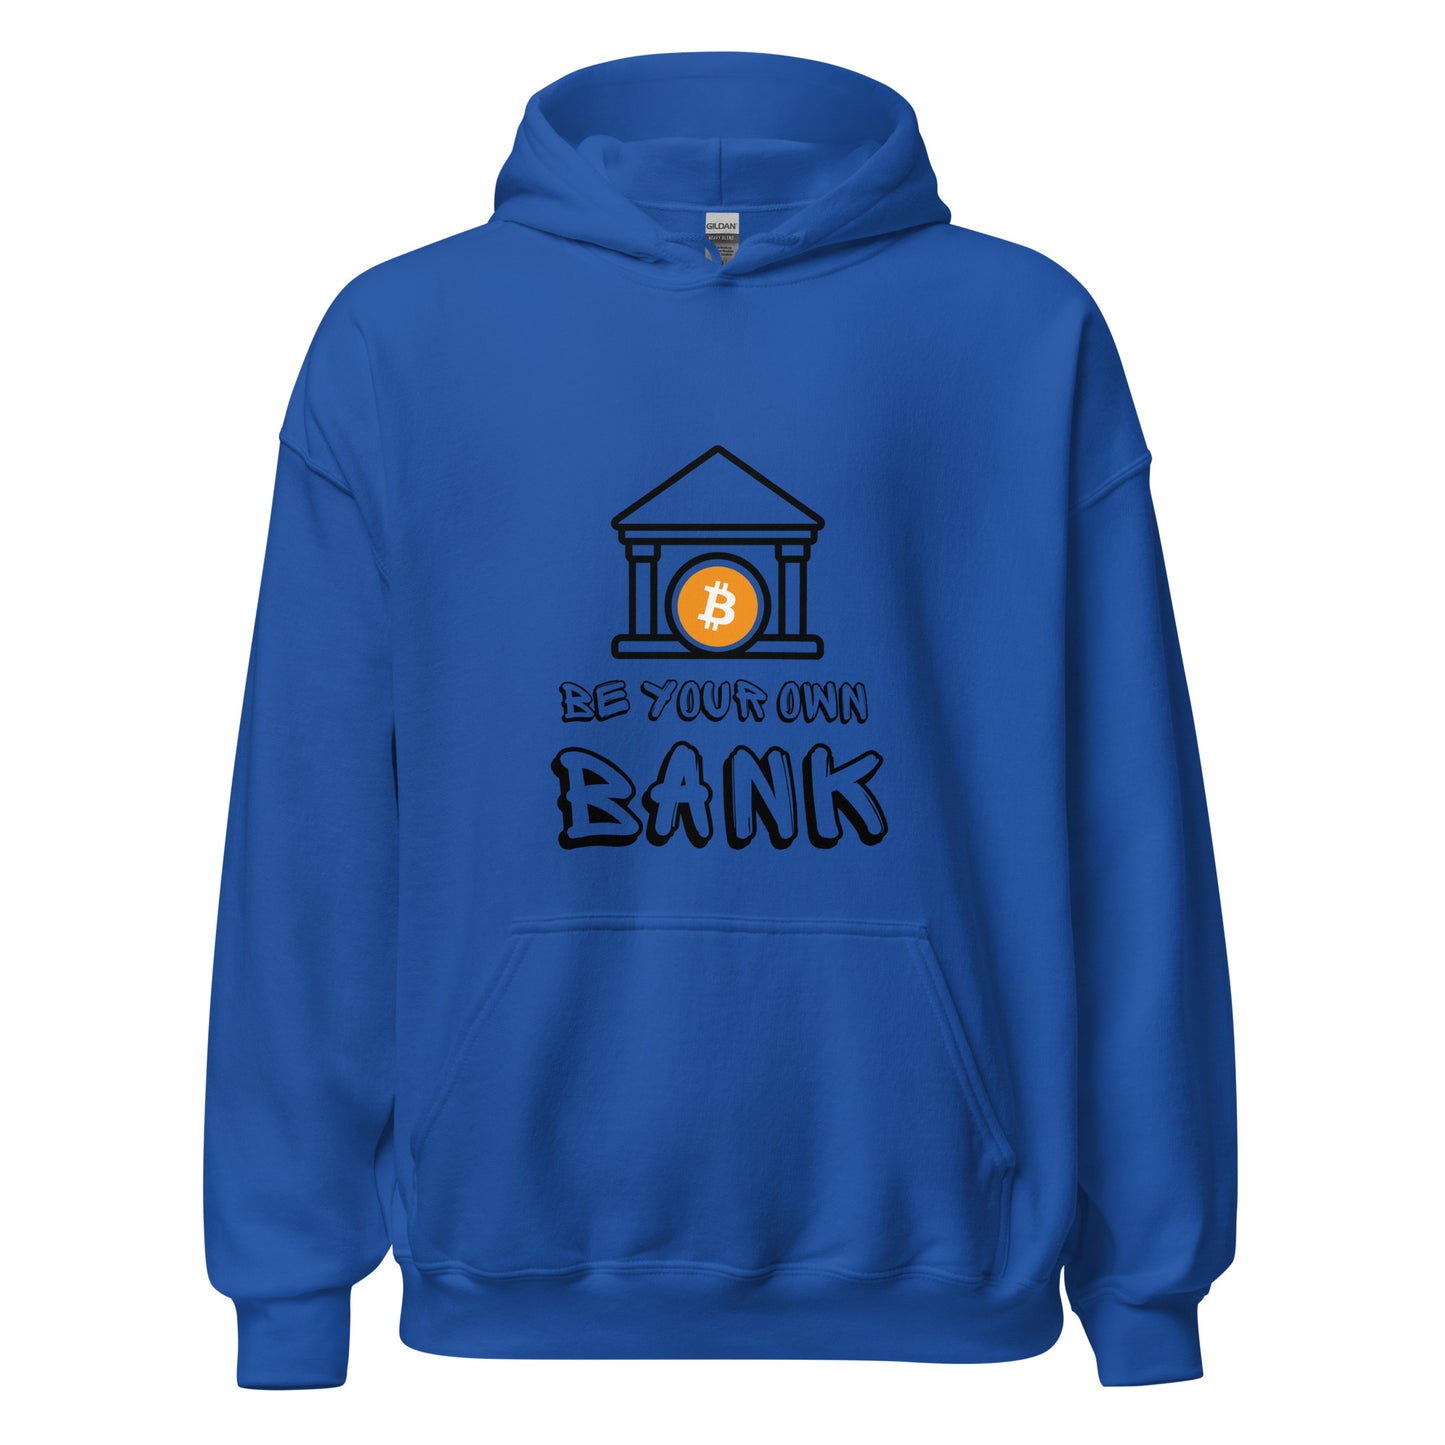 Be your own bank Unisex Hoodie